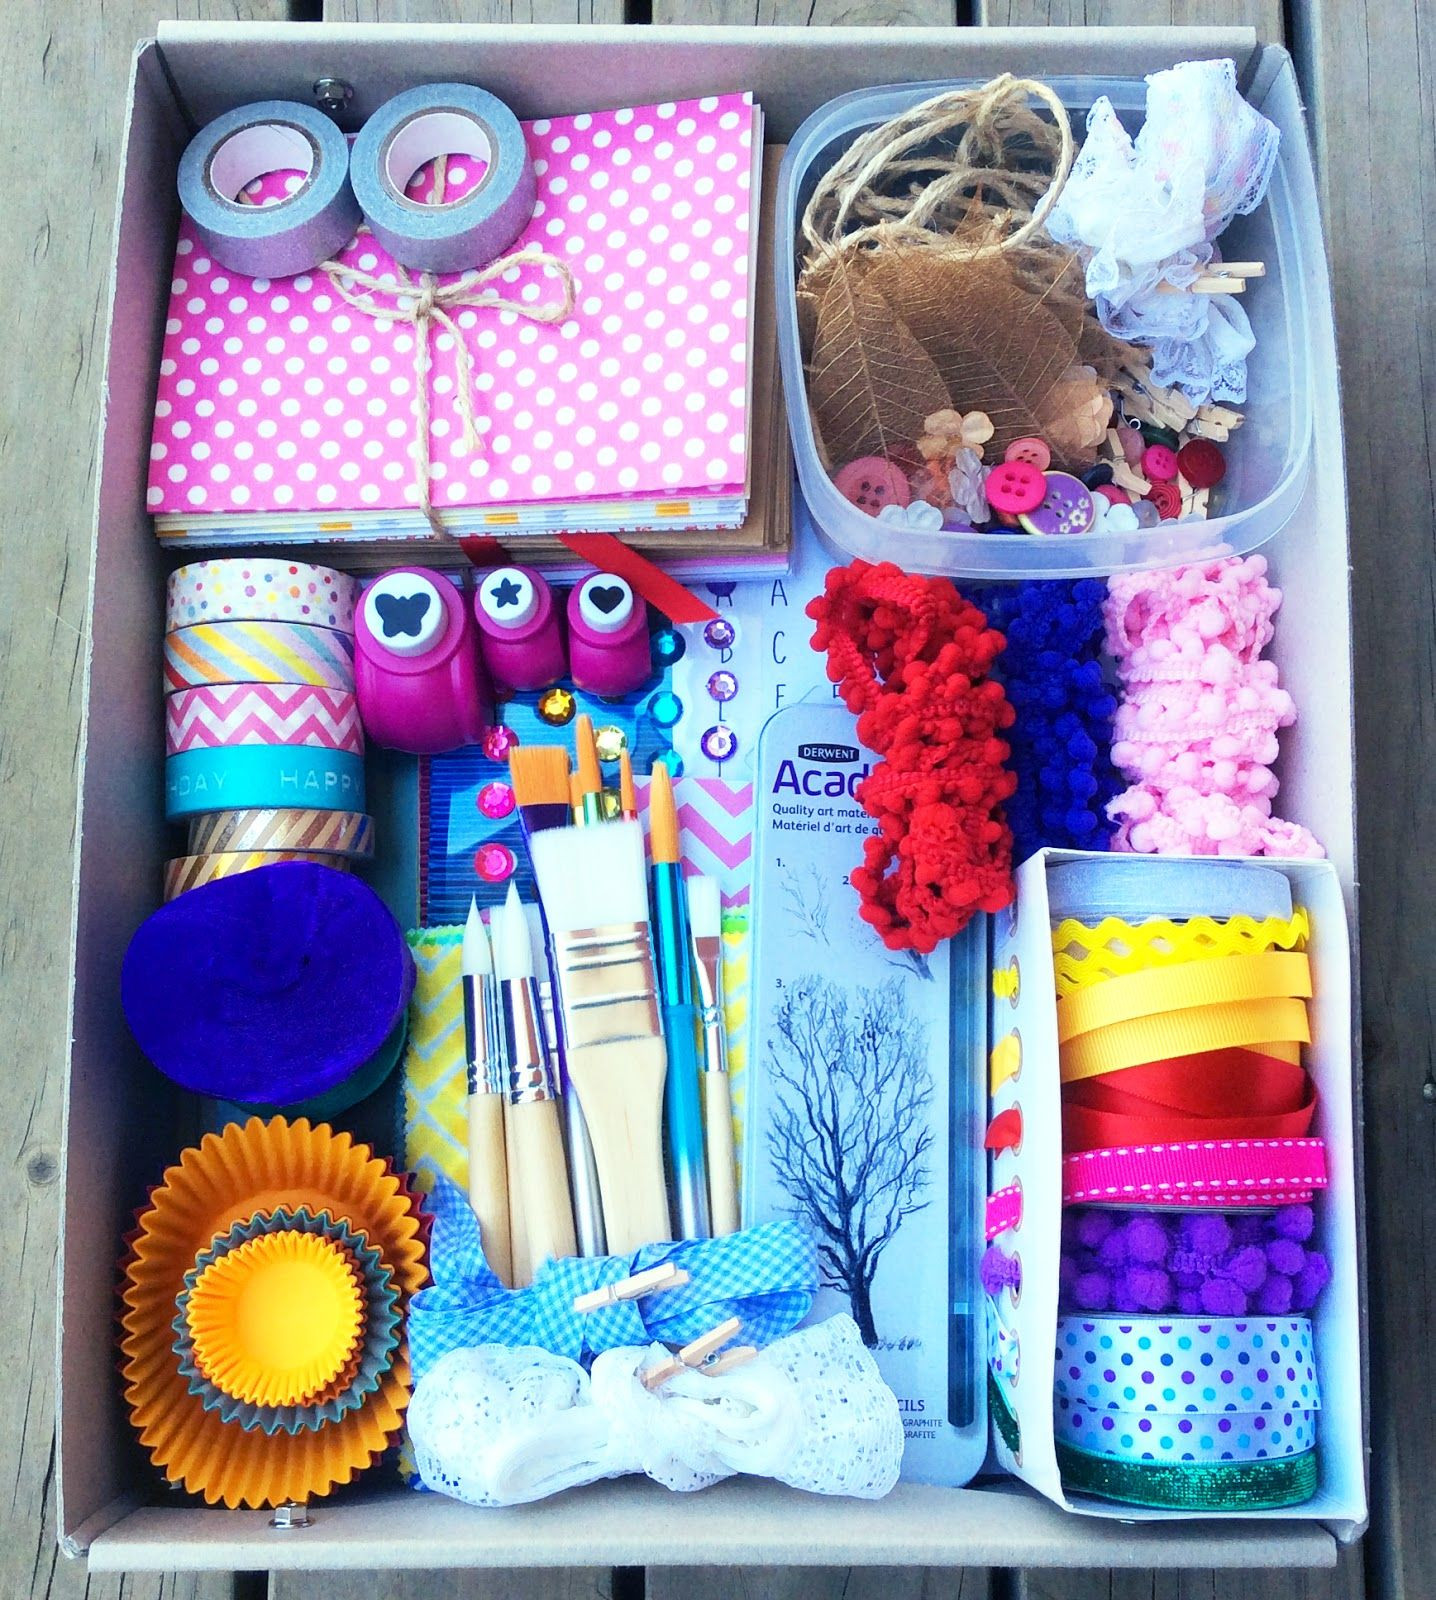 Birthday Return Gift Ideas For 8 Year Old
 Living Future Memories Creating the best ever craft box